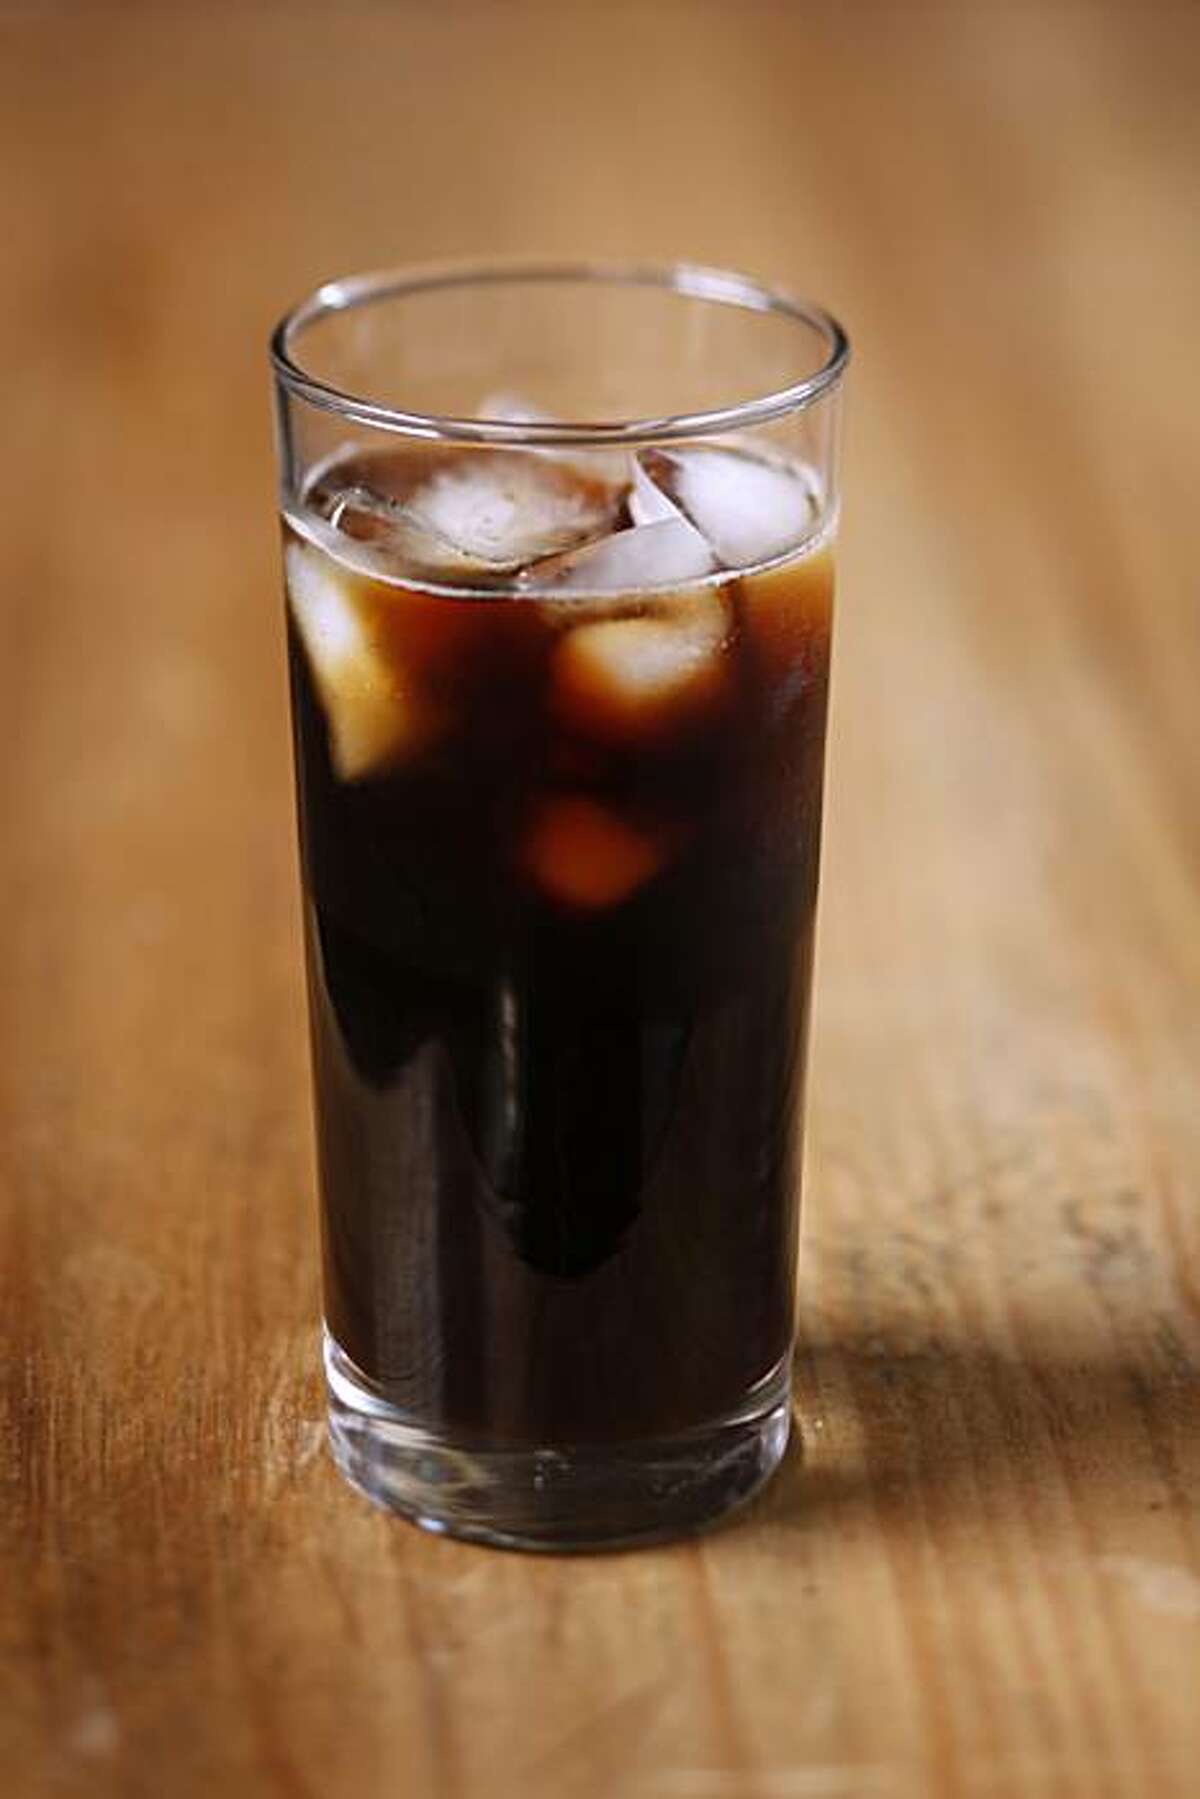 Cold-brewed iced coffee in San Francisco, Calif., on June 30, 2010.